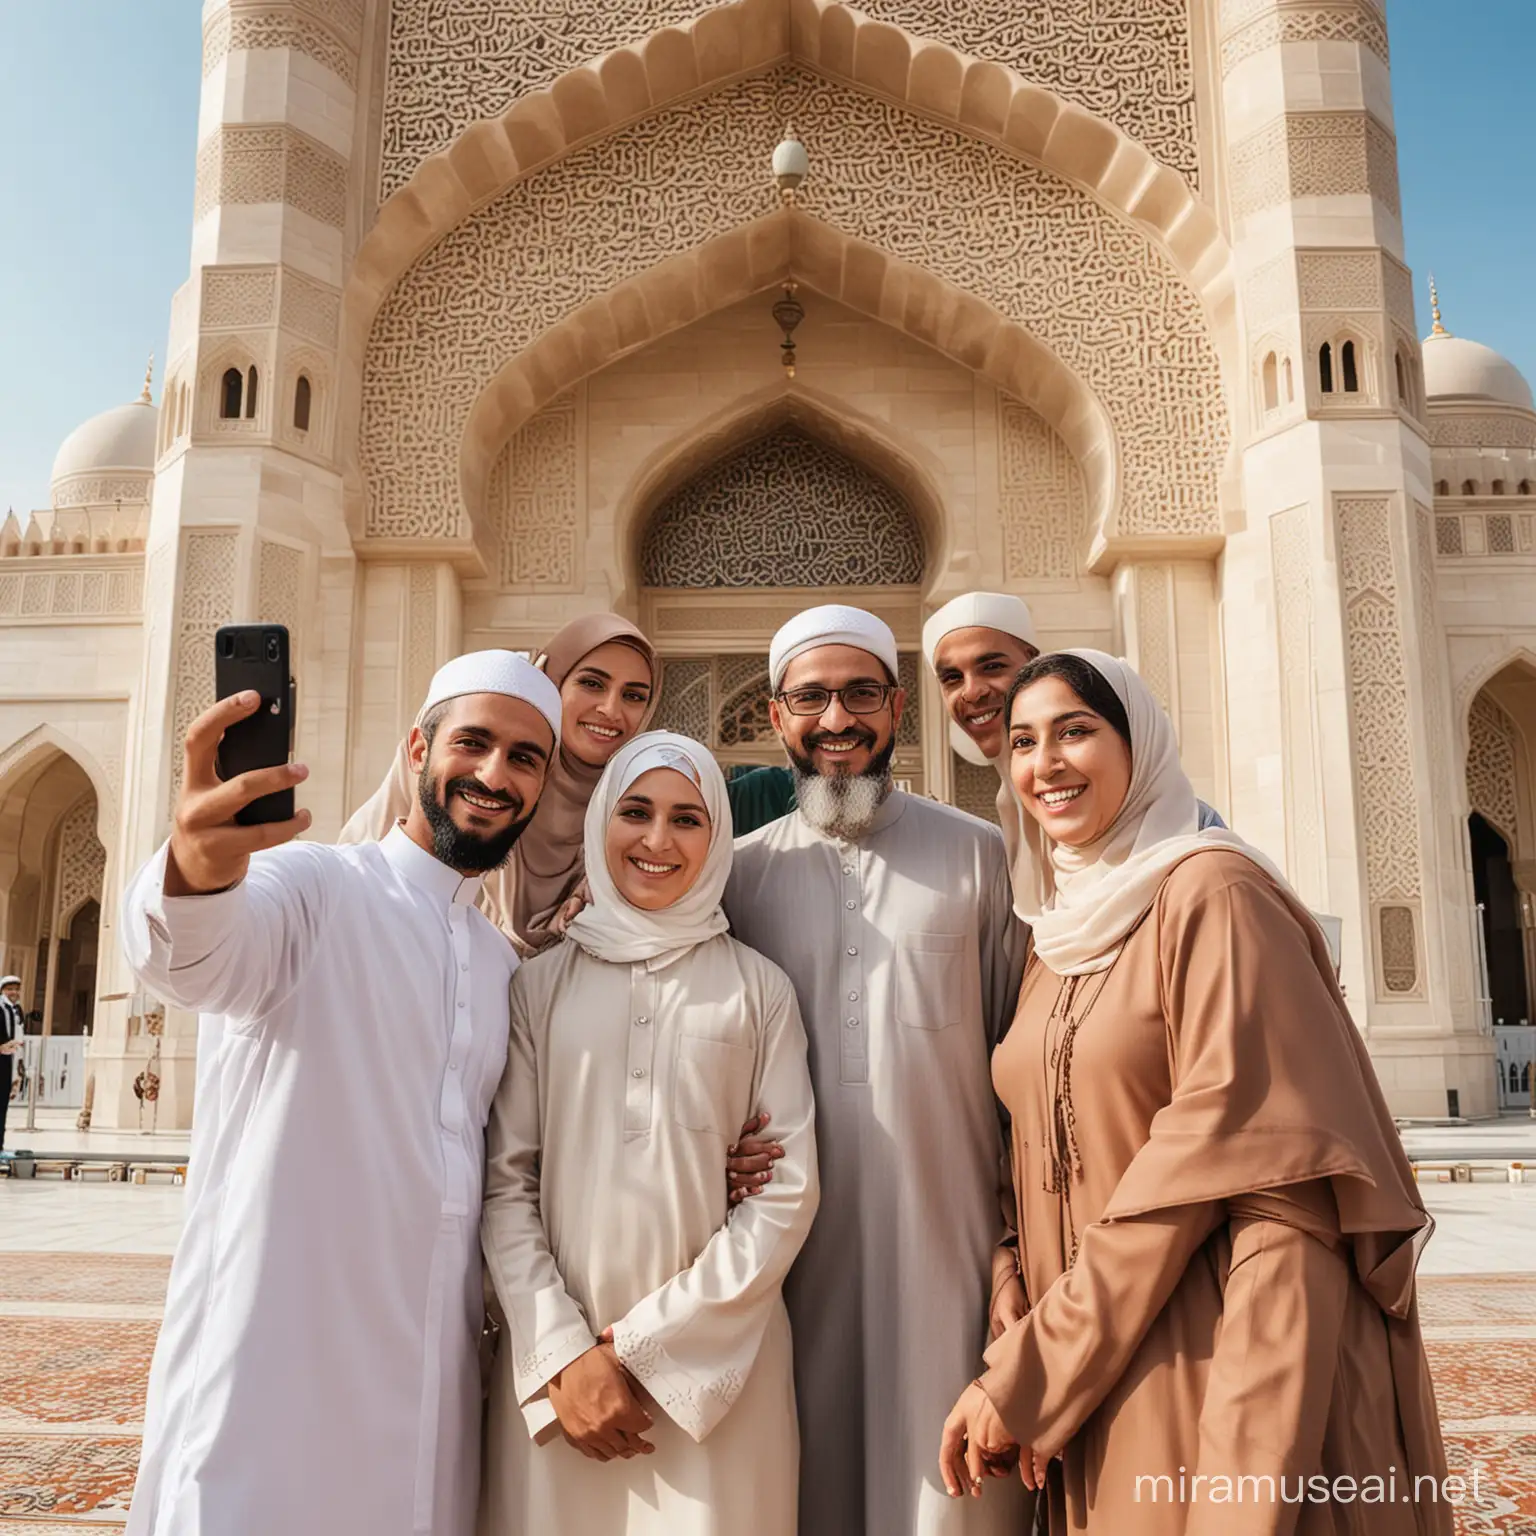 A Muslim family consisting of father, mother and three sons, taking selfies with a mosque as a background, the atmosphere of Eid al-Fitr, happy